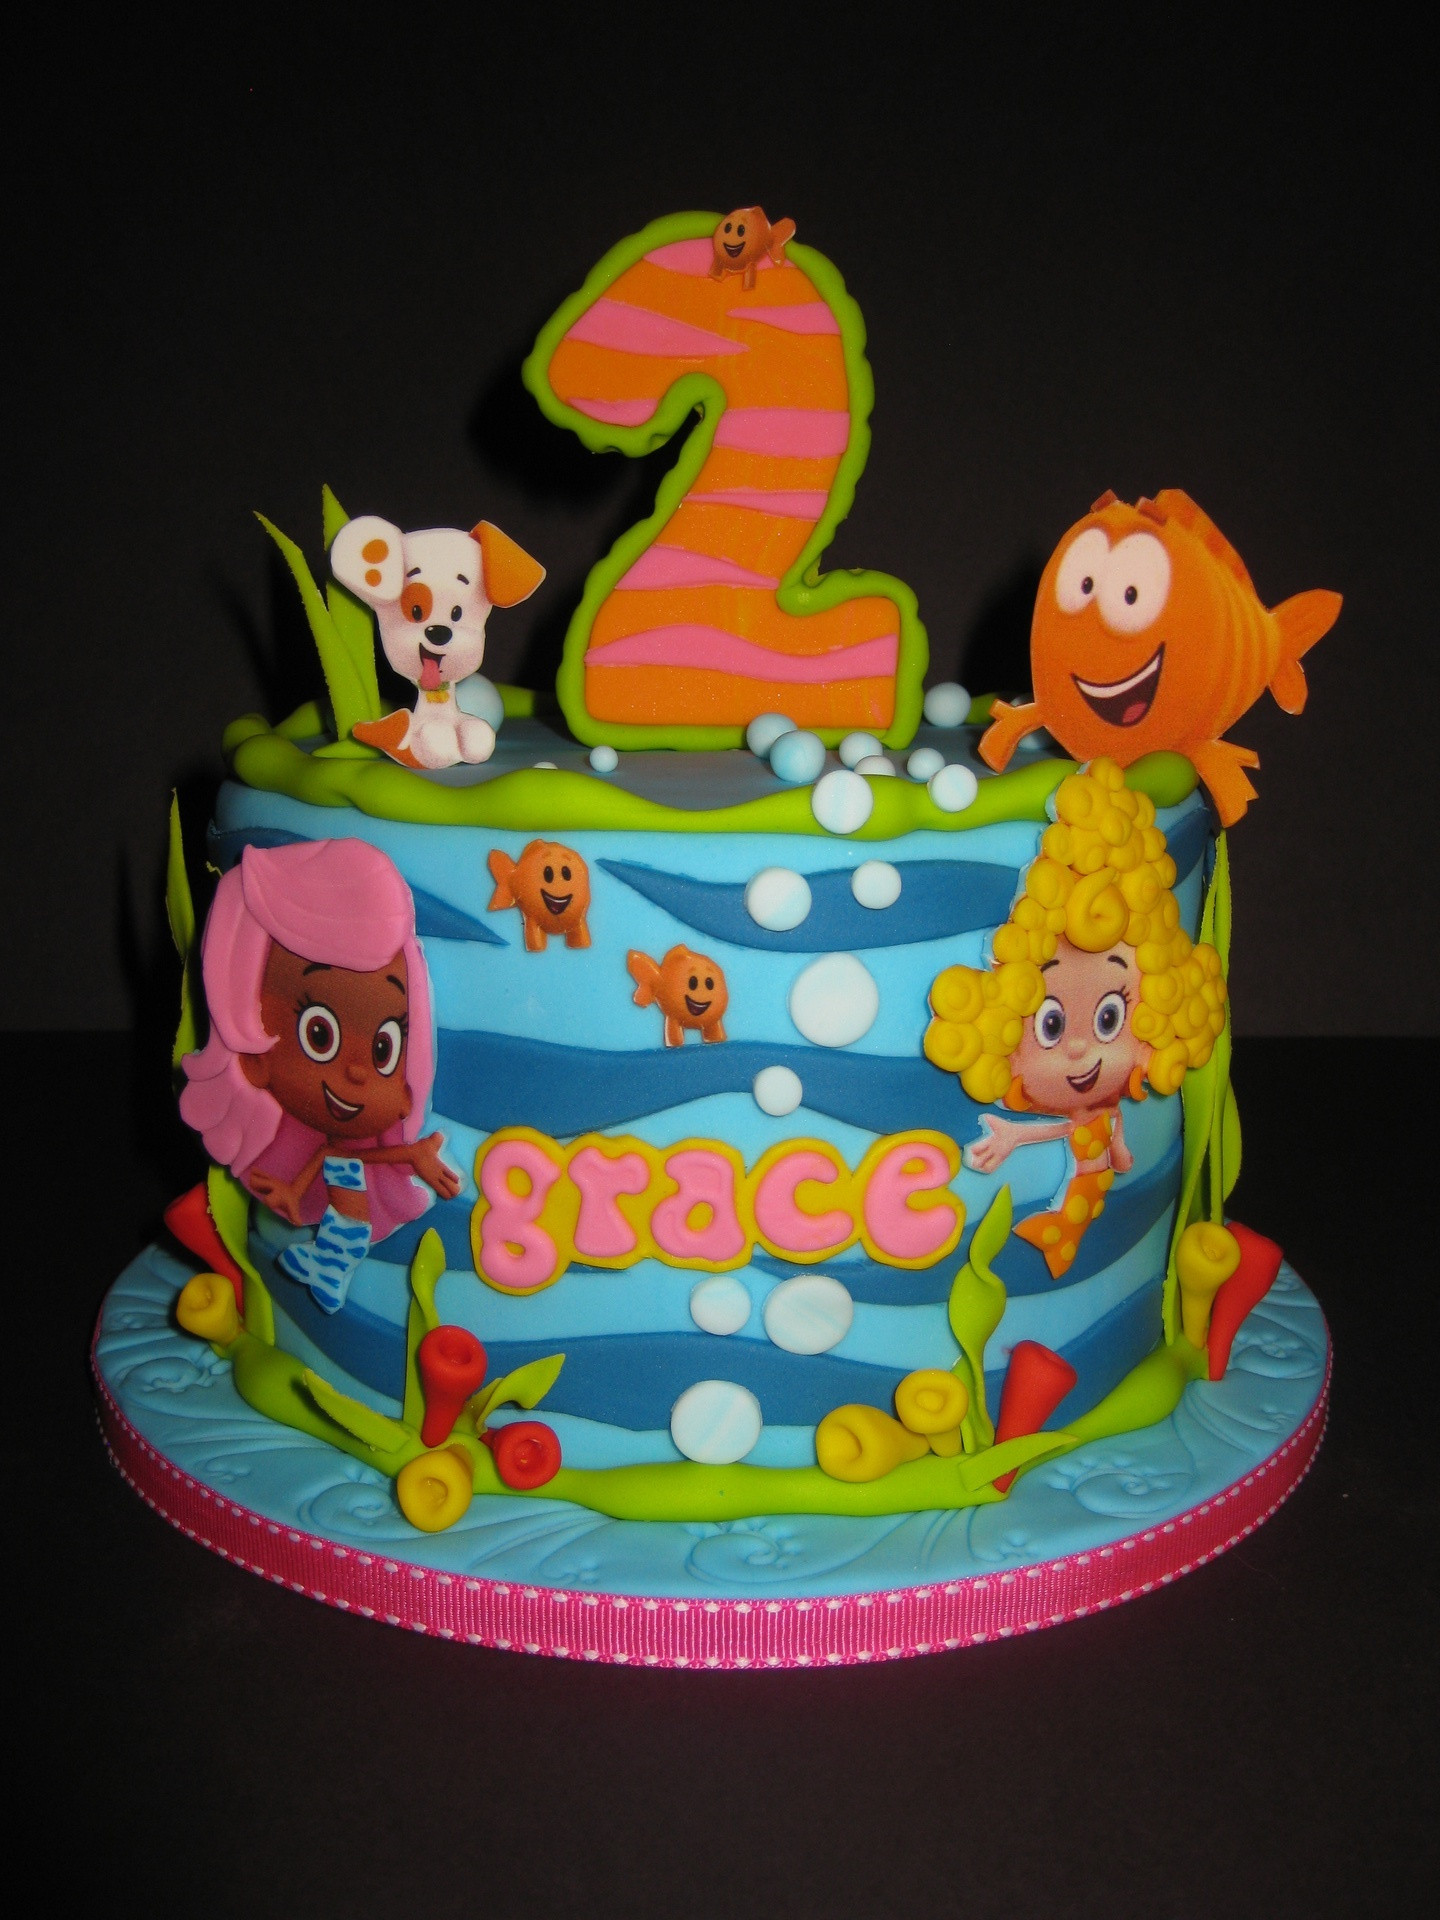 Bubble Guppie Birthday Cake
 Home Tips Bubble Guppies Birthday Cake For Children Party